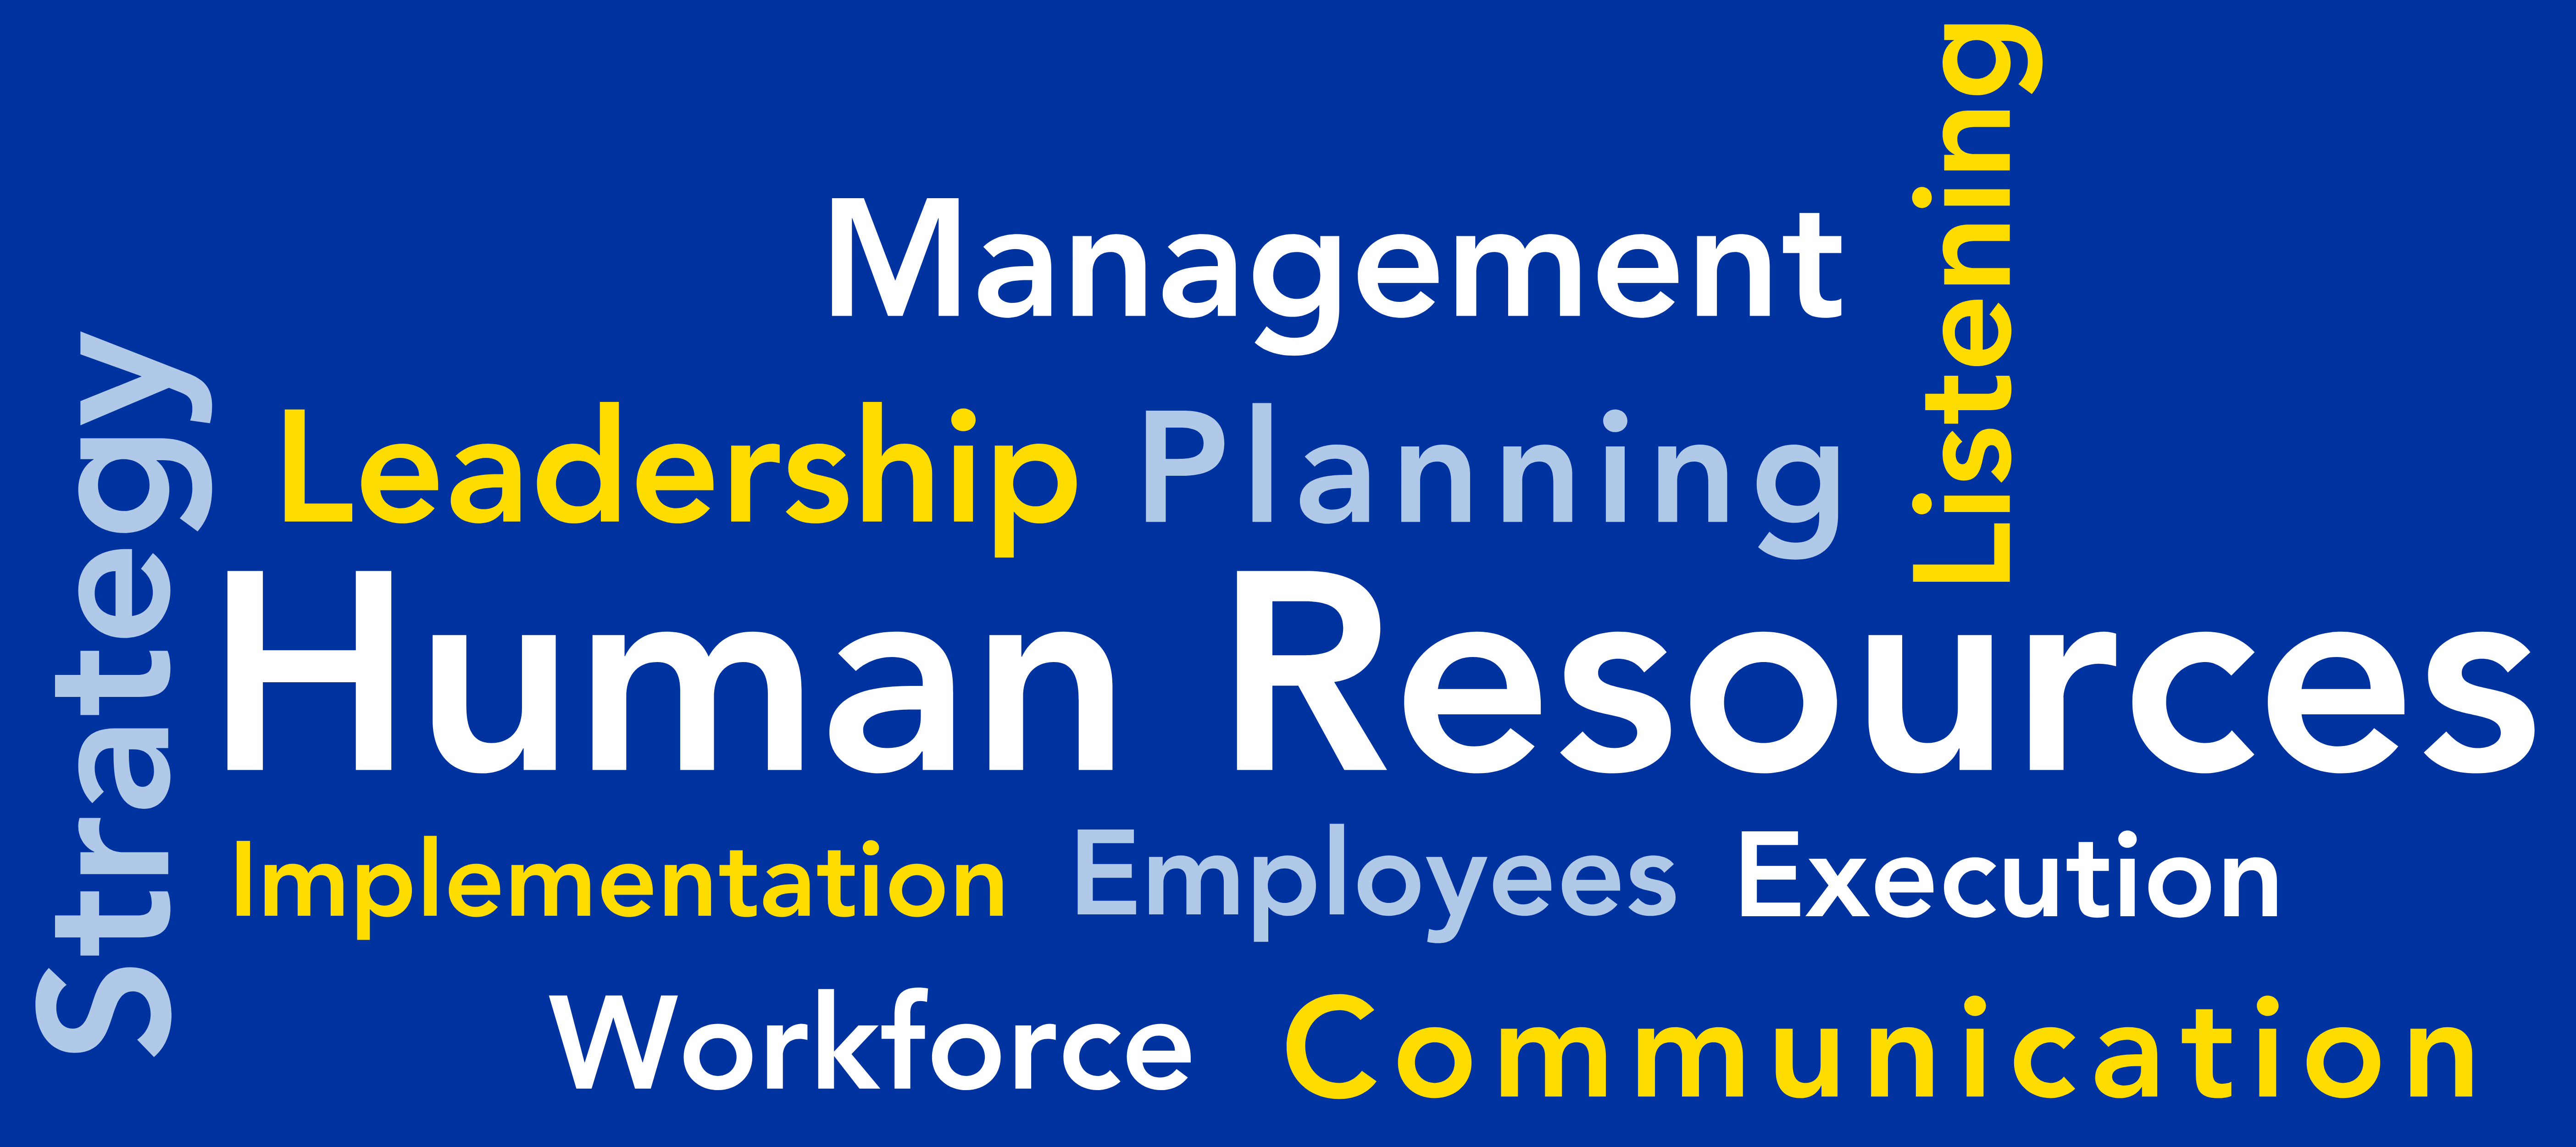 Human Resources Word Cloud